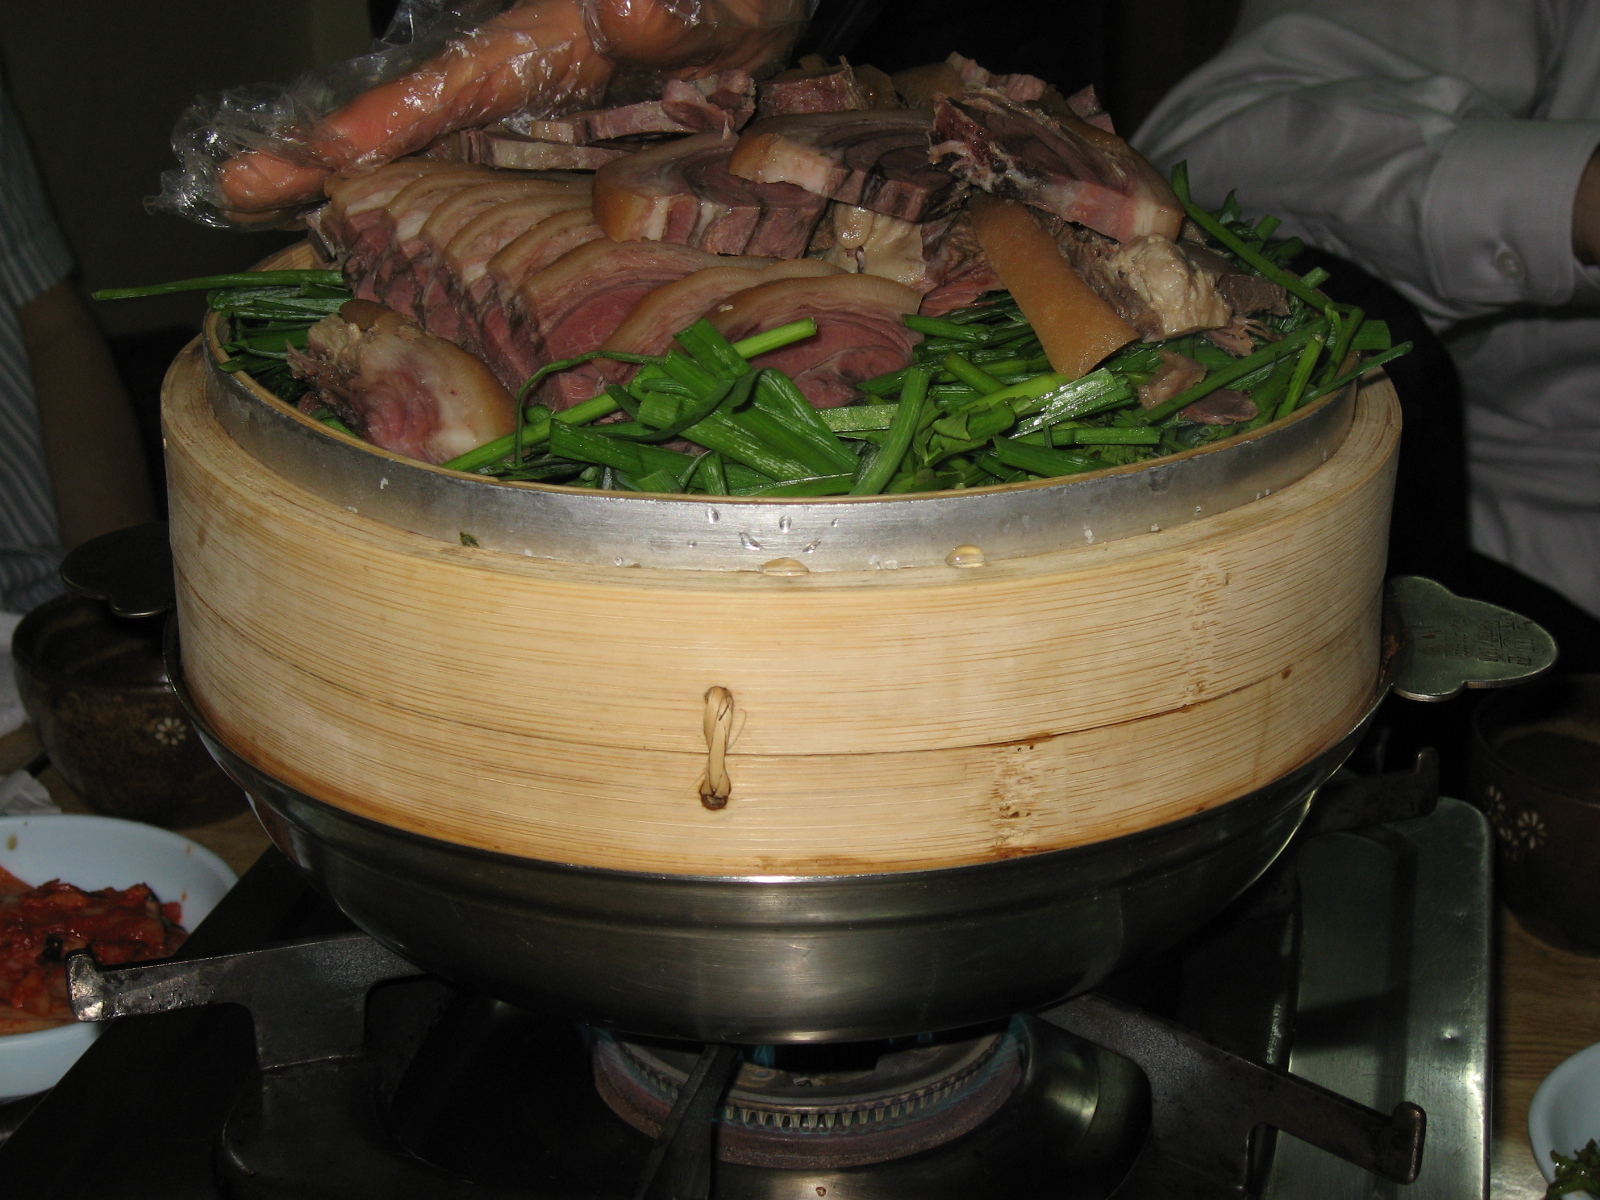 there is a pot with some meat on it